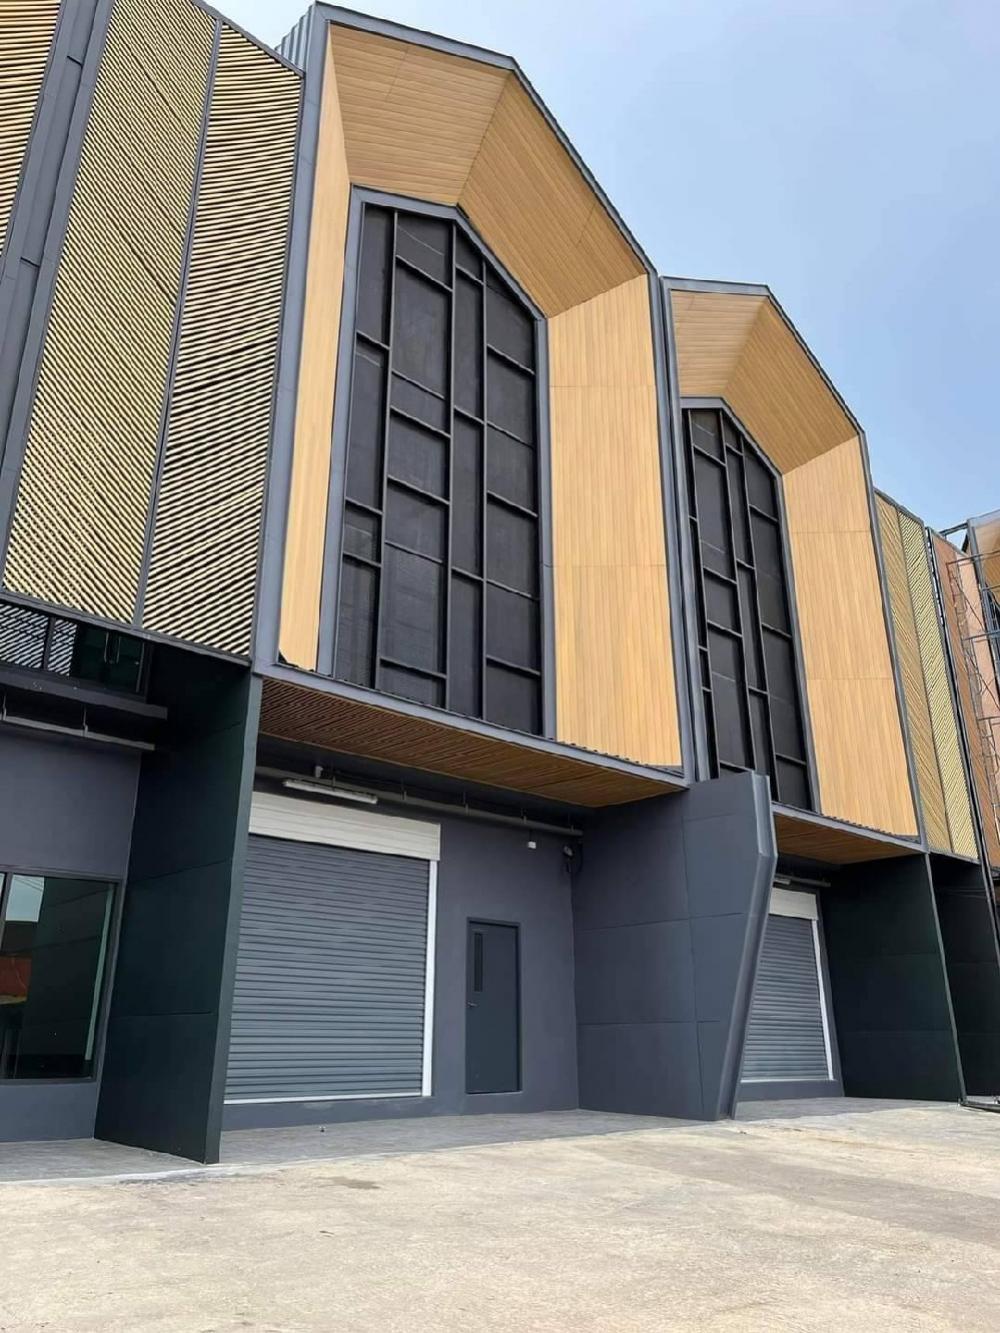 For RentWarehouseMahachai Samut Sakhon : Warehouse / small factory for rent Brand new building The total area below is 220 sq m., and the top 60 sq m will be used as an office. Or if you want to divide it into residences, it can have many functions.